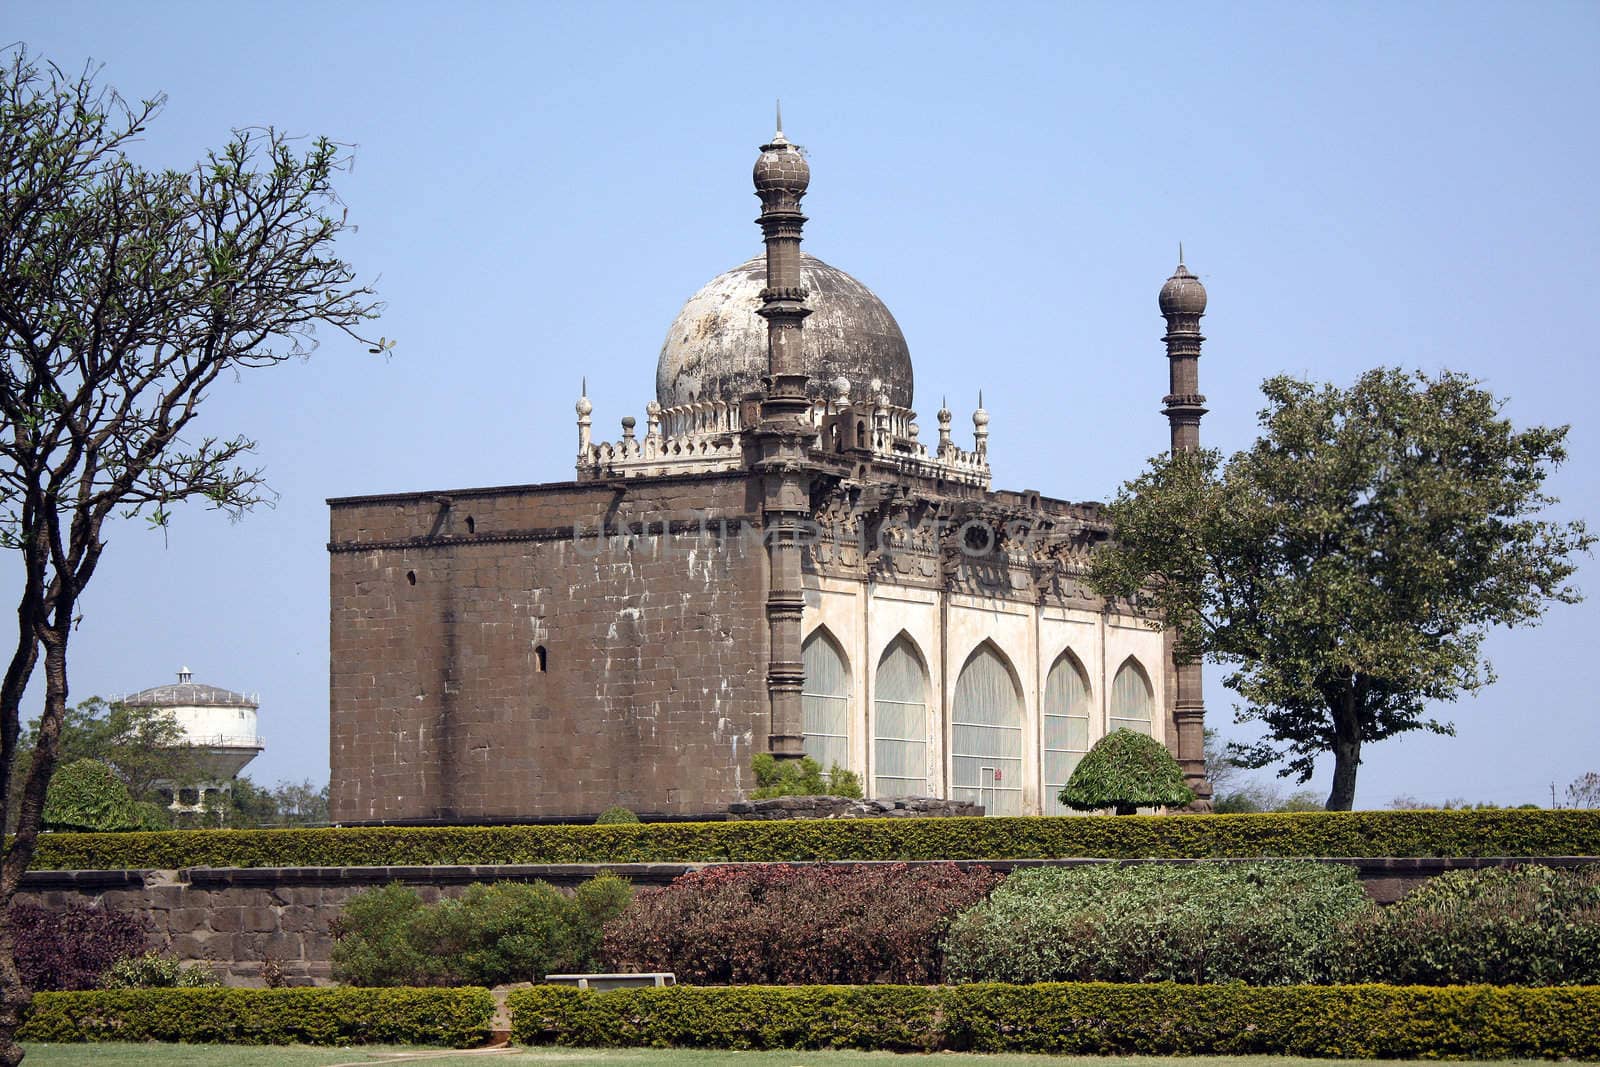 A beautiful ancient mosque in India near a garden.